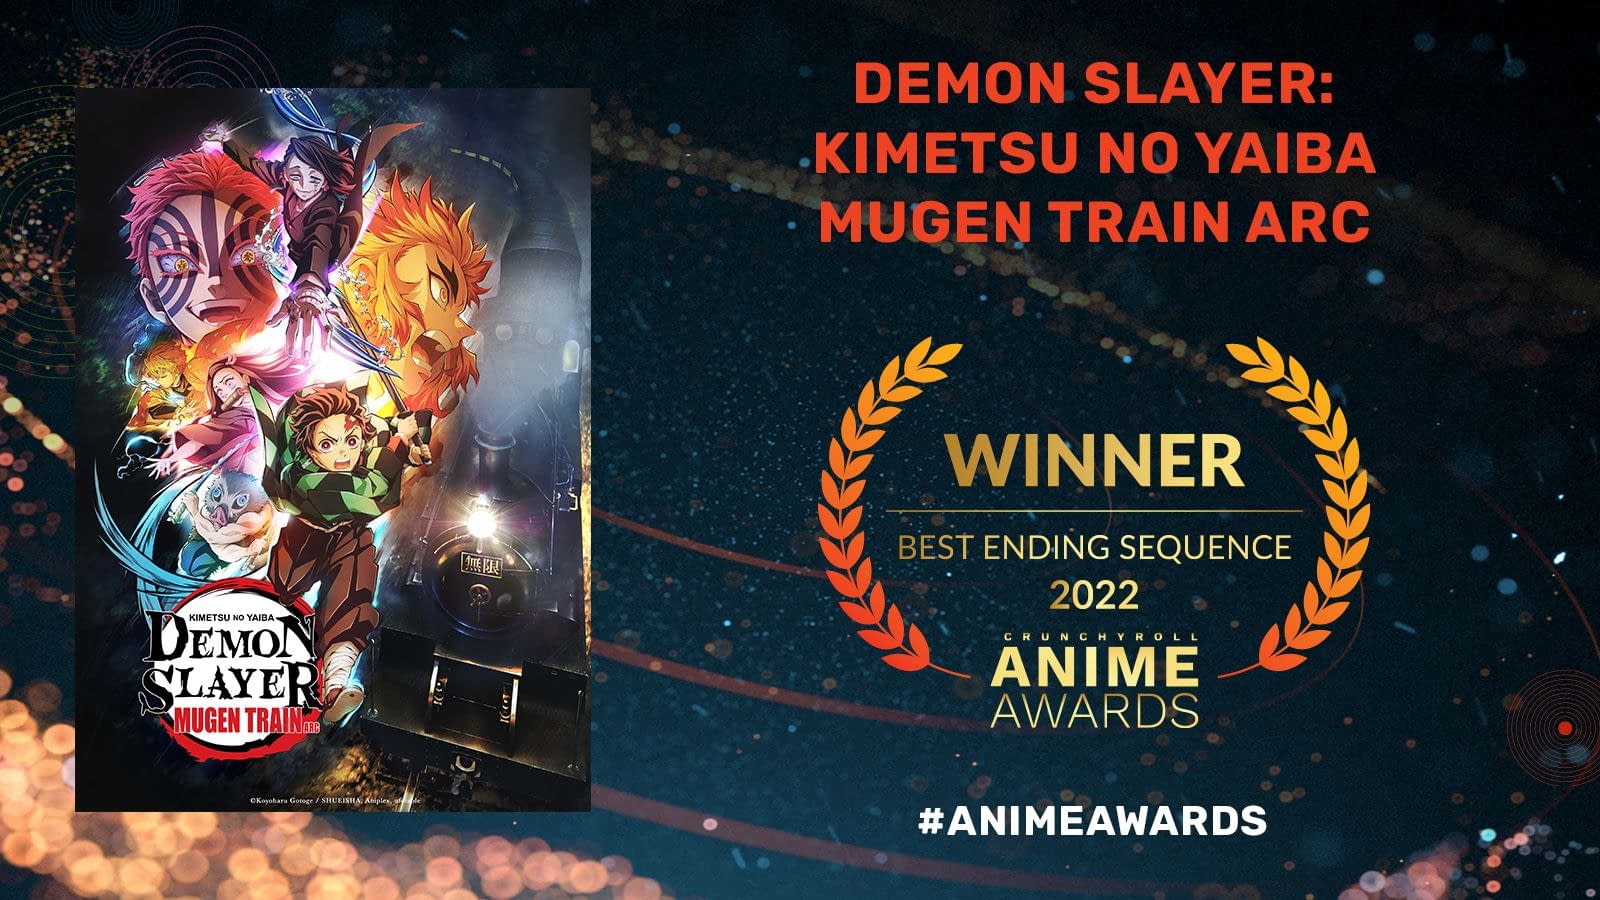 Attack on Titan with 12 nominations in the Crunchyroll Anime